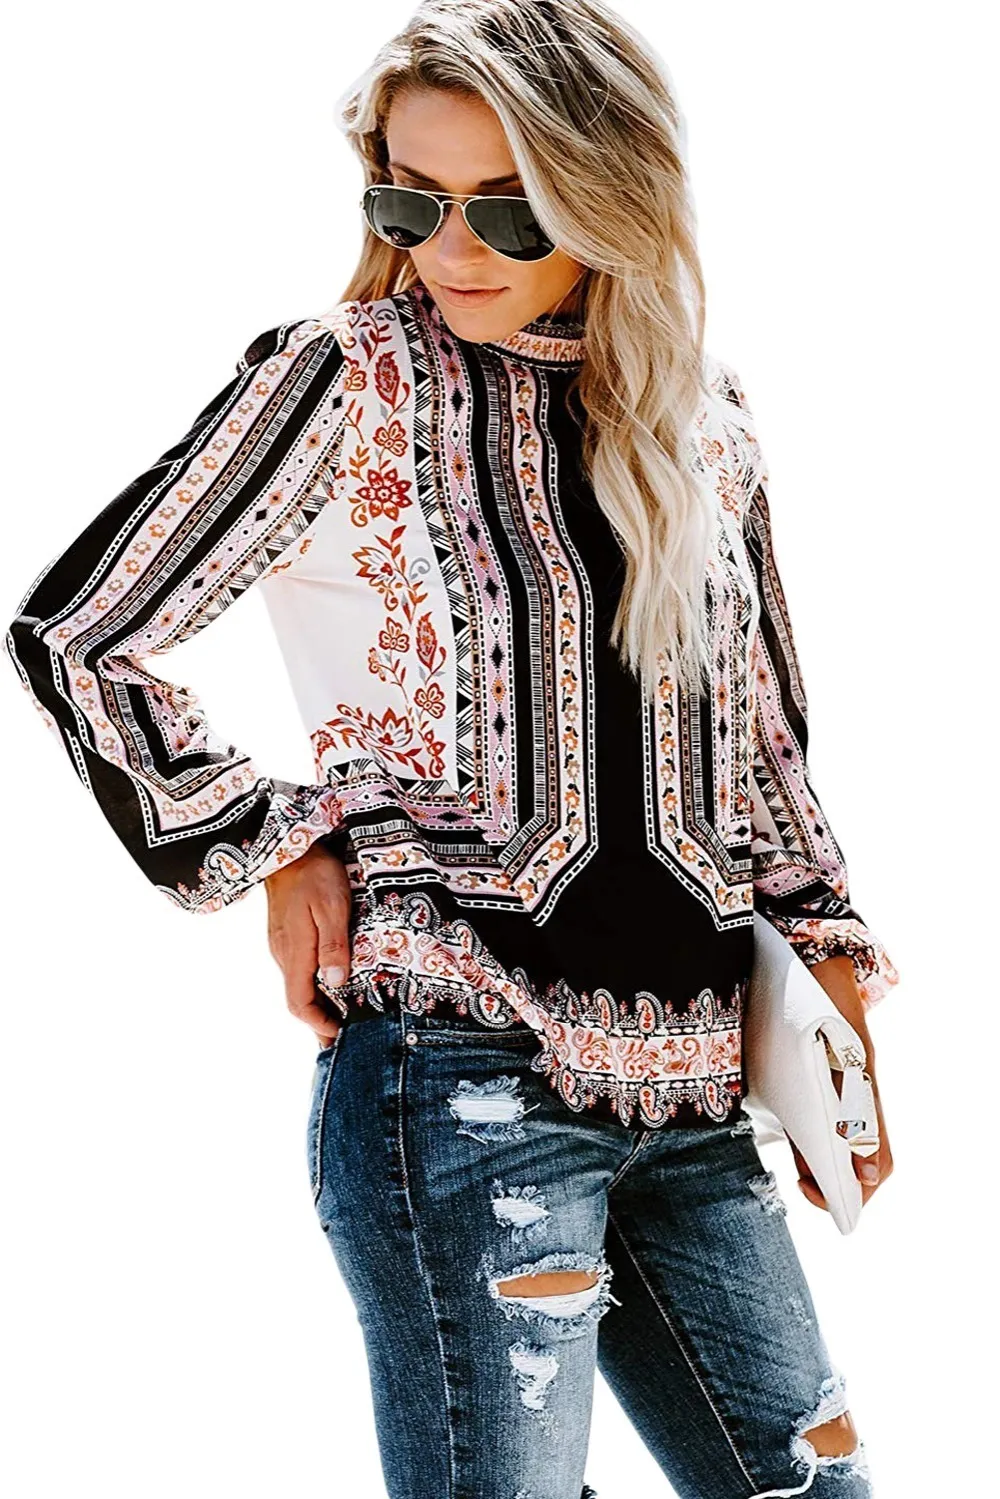 Floral-and-Tribal-Print-Smocked-Long-Sleeve-Blouse-LC251632-1-3